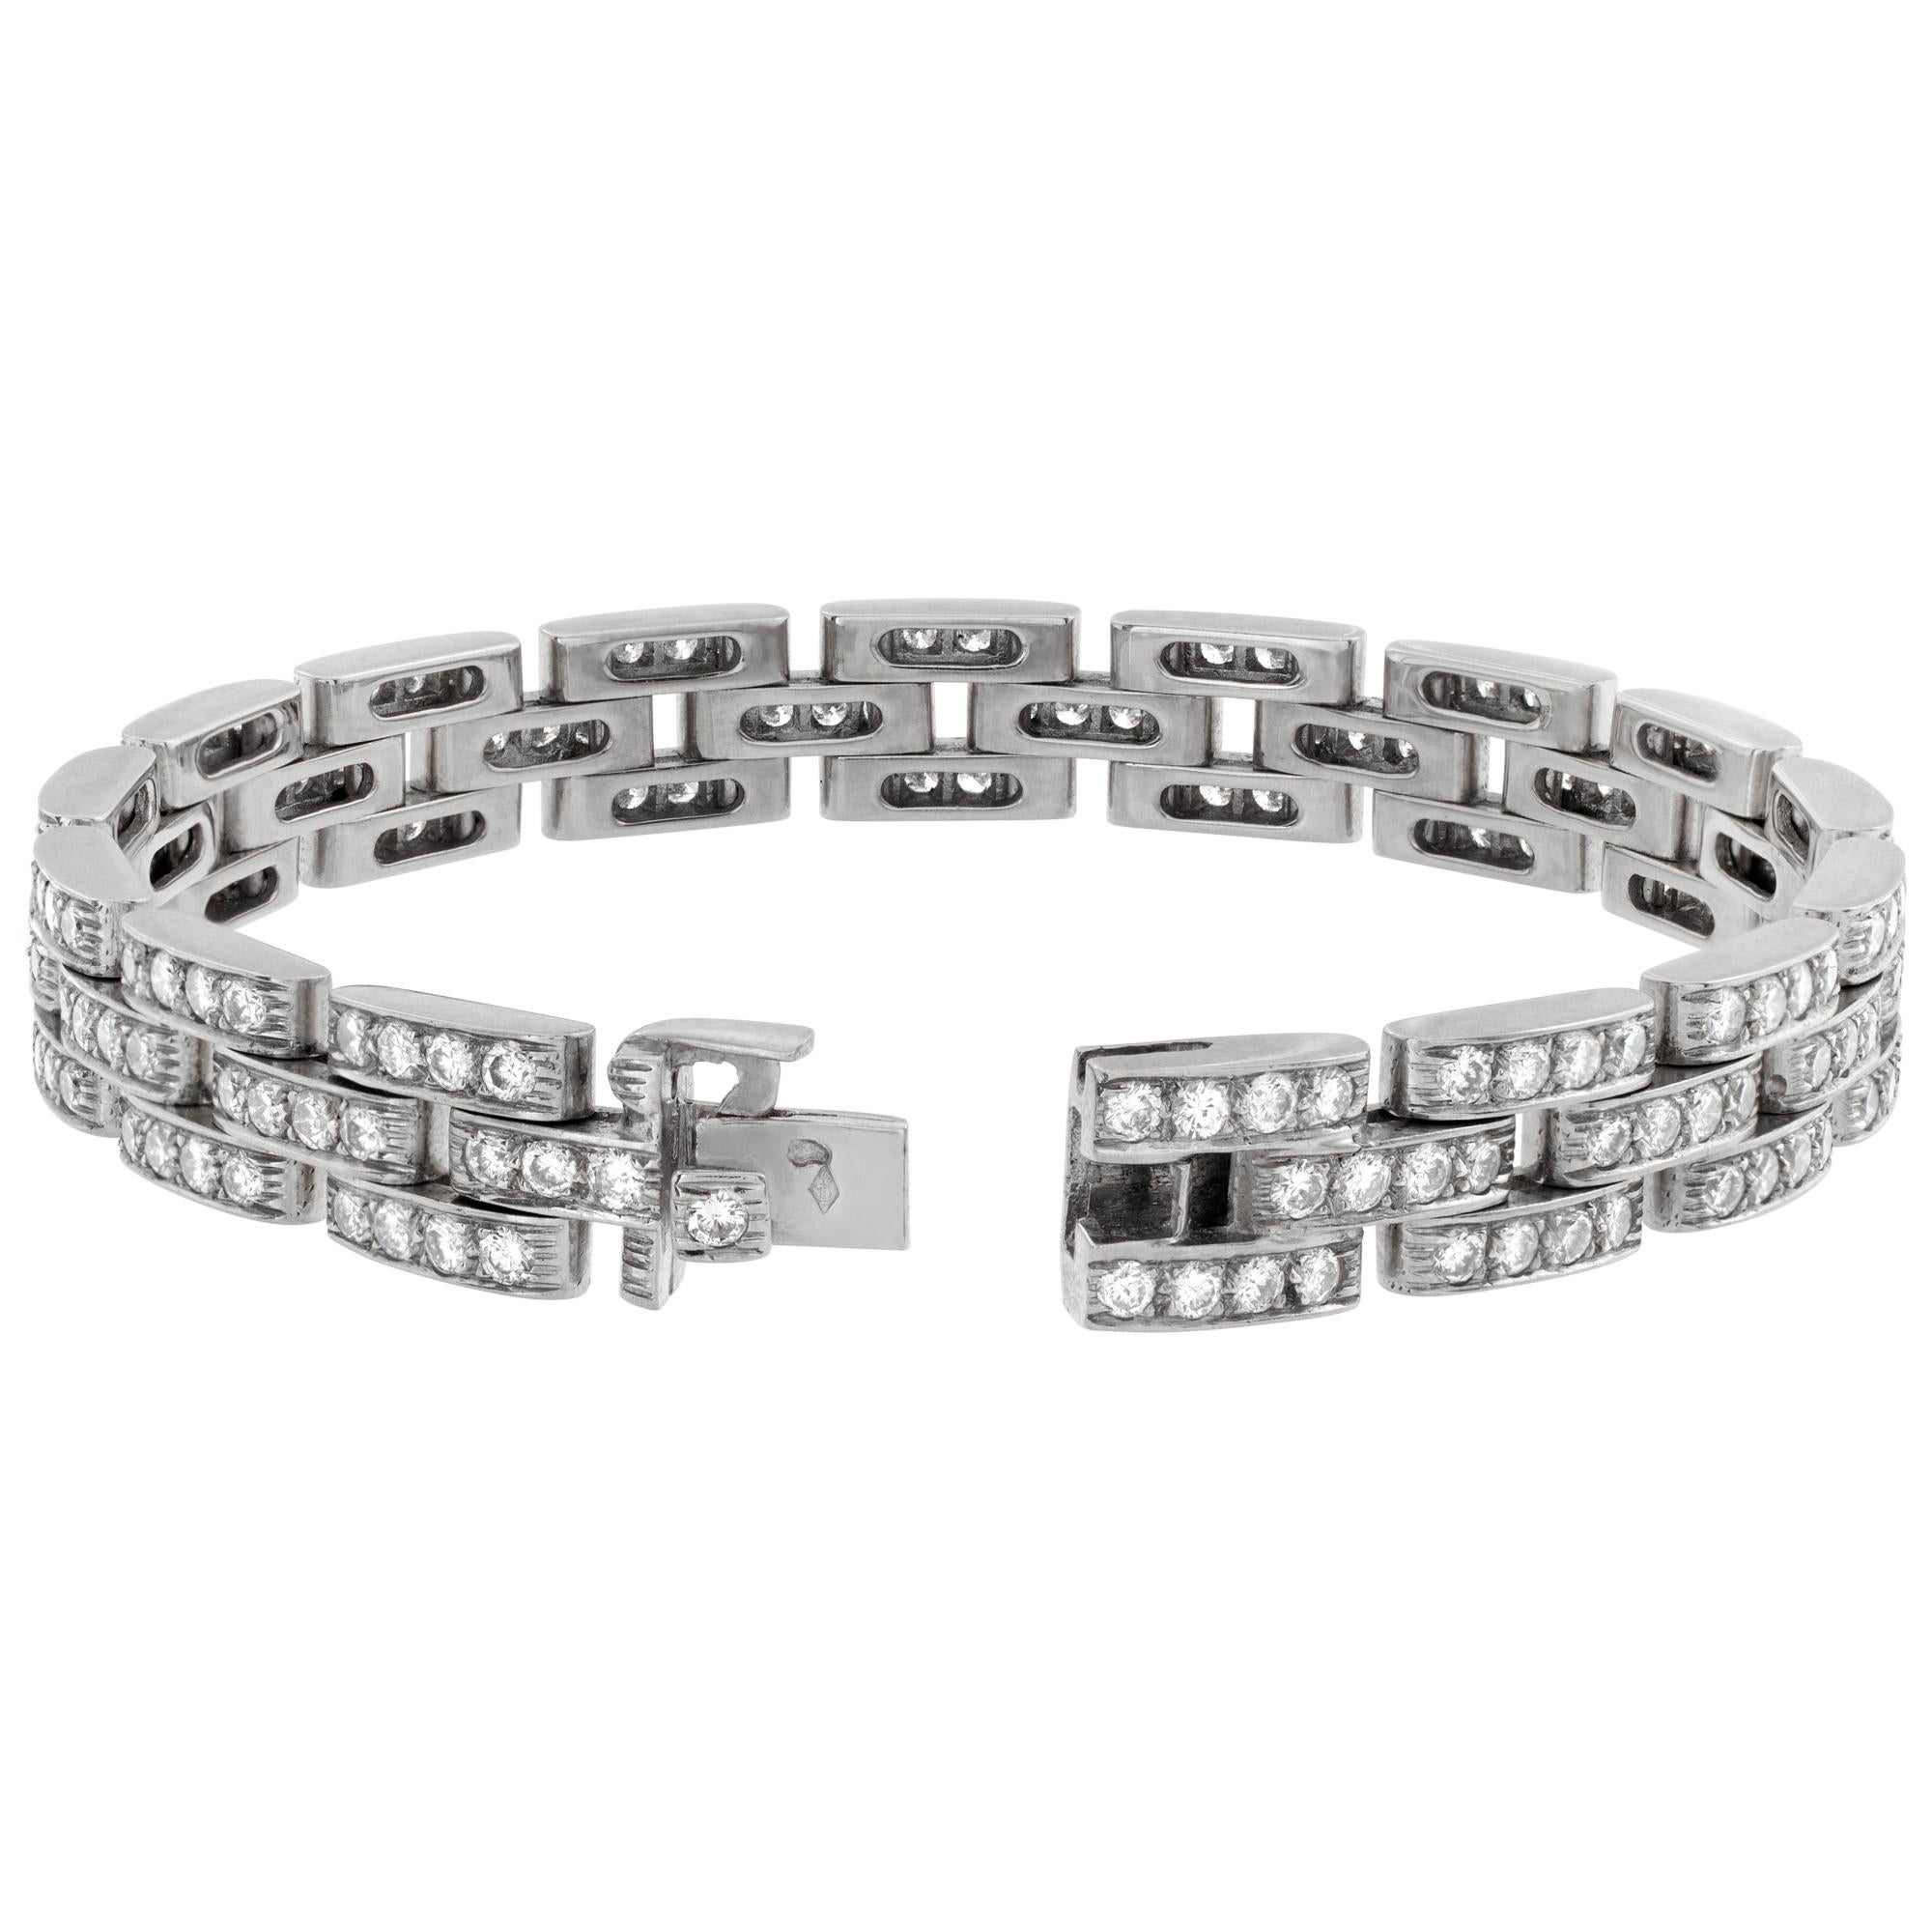 Cartier Maillon Panthere diamond bracelet in 18k white gold, 3 rows of round brilliant cut diamonds totalling over 2.80 carats in G-H color, VS clarity diamonds. Complete with box & certificate. 7